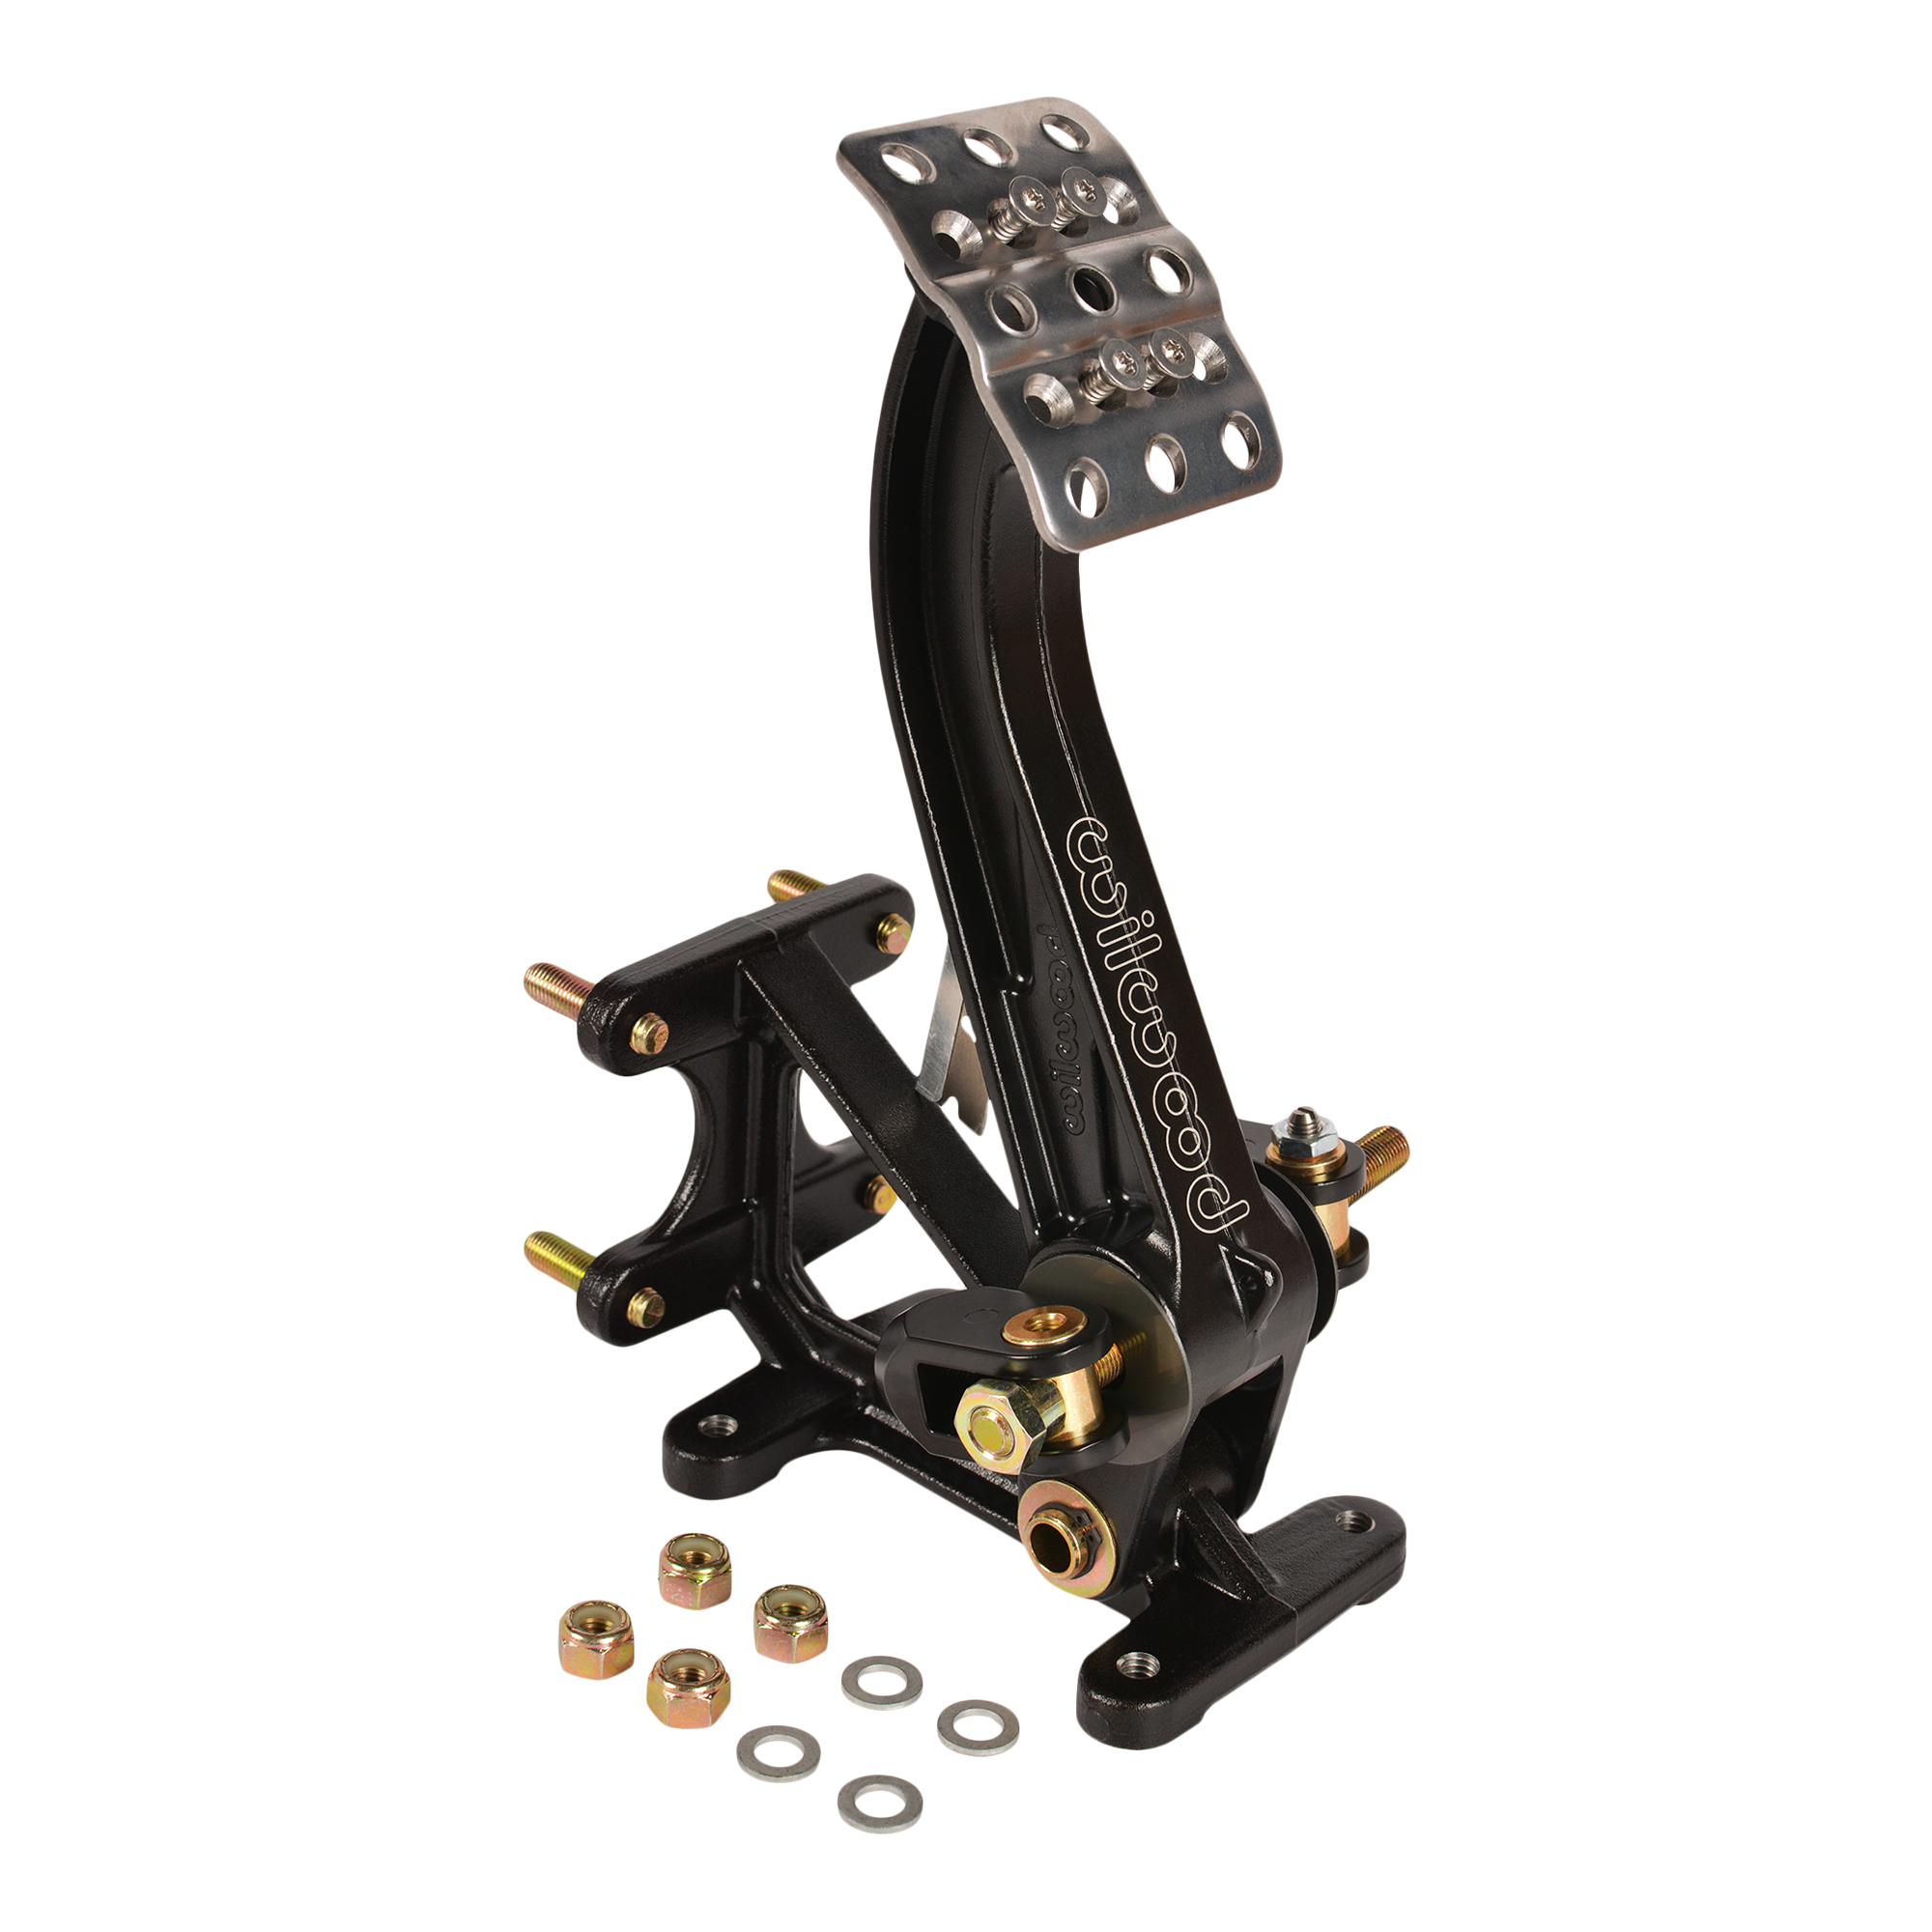 Wilwood Dual Floor-Mounted Pedal Assembly - JOES Racing Products